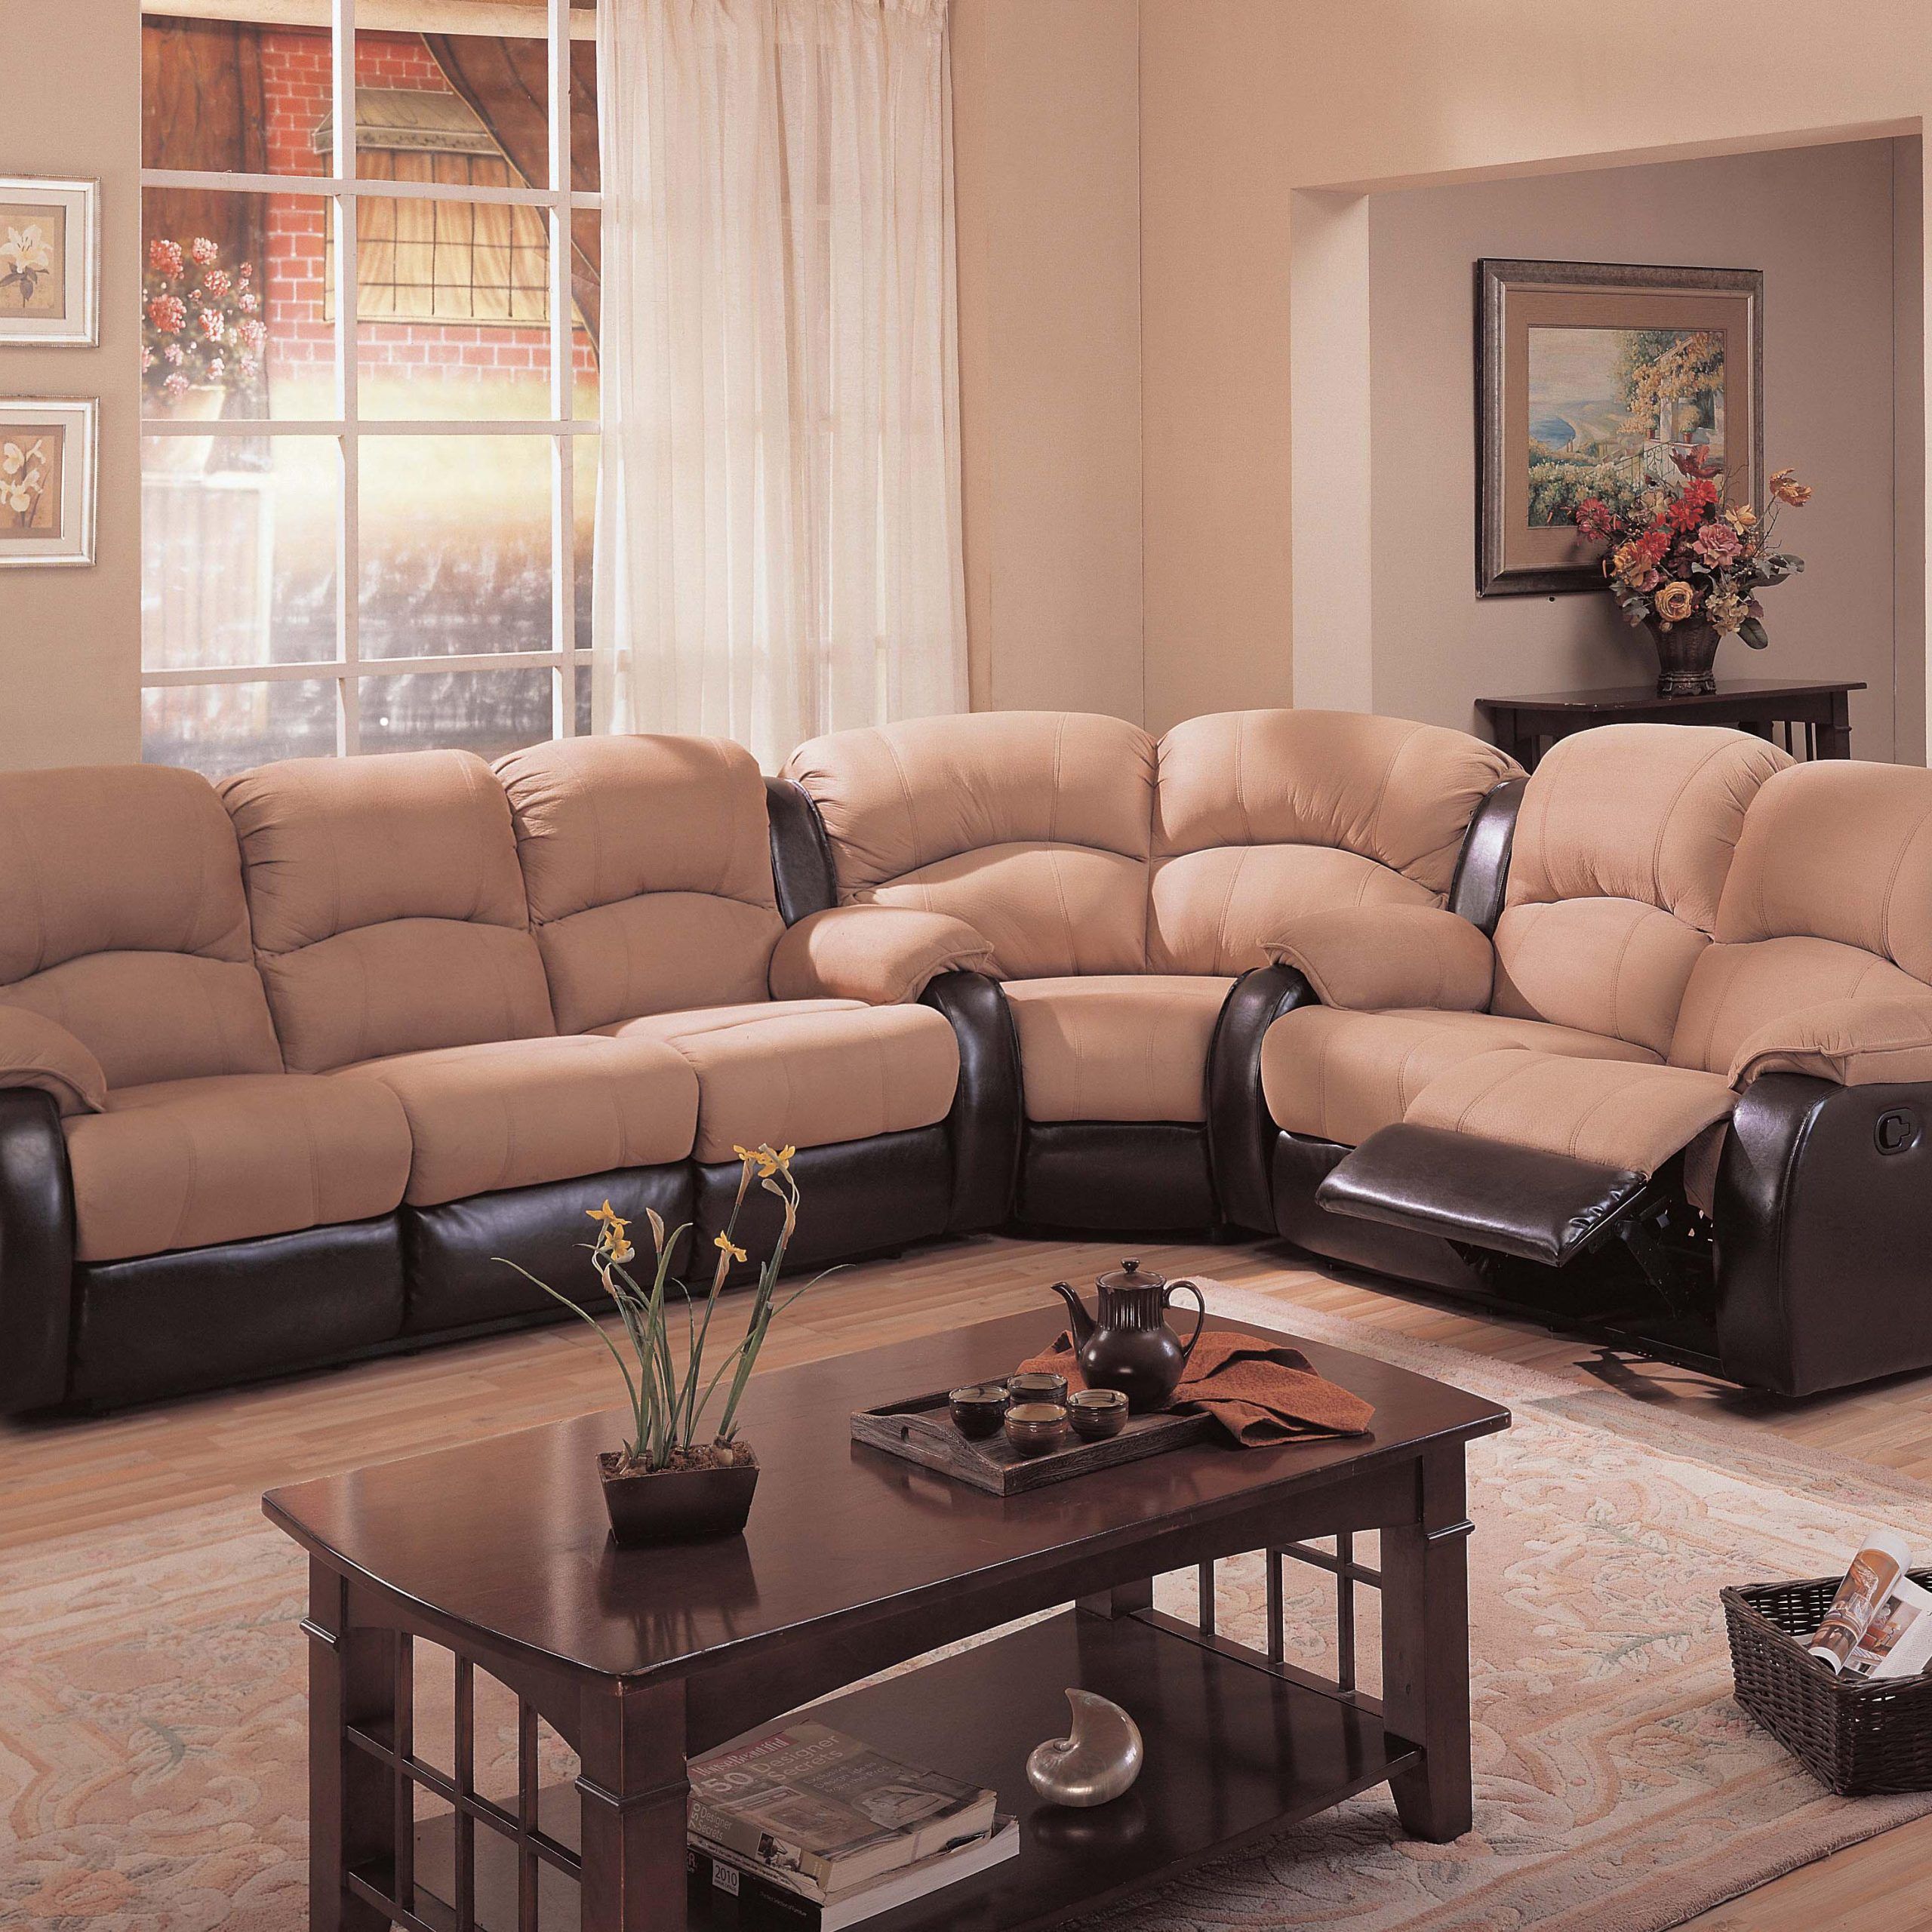 Microfiber Sectional Couch With Recliner: Chic Features For Your Home Regarding Microfiber Sectional Corner Sofas (Gallery 2 of 20)